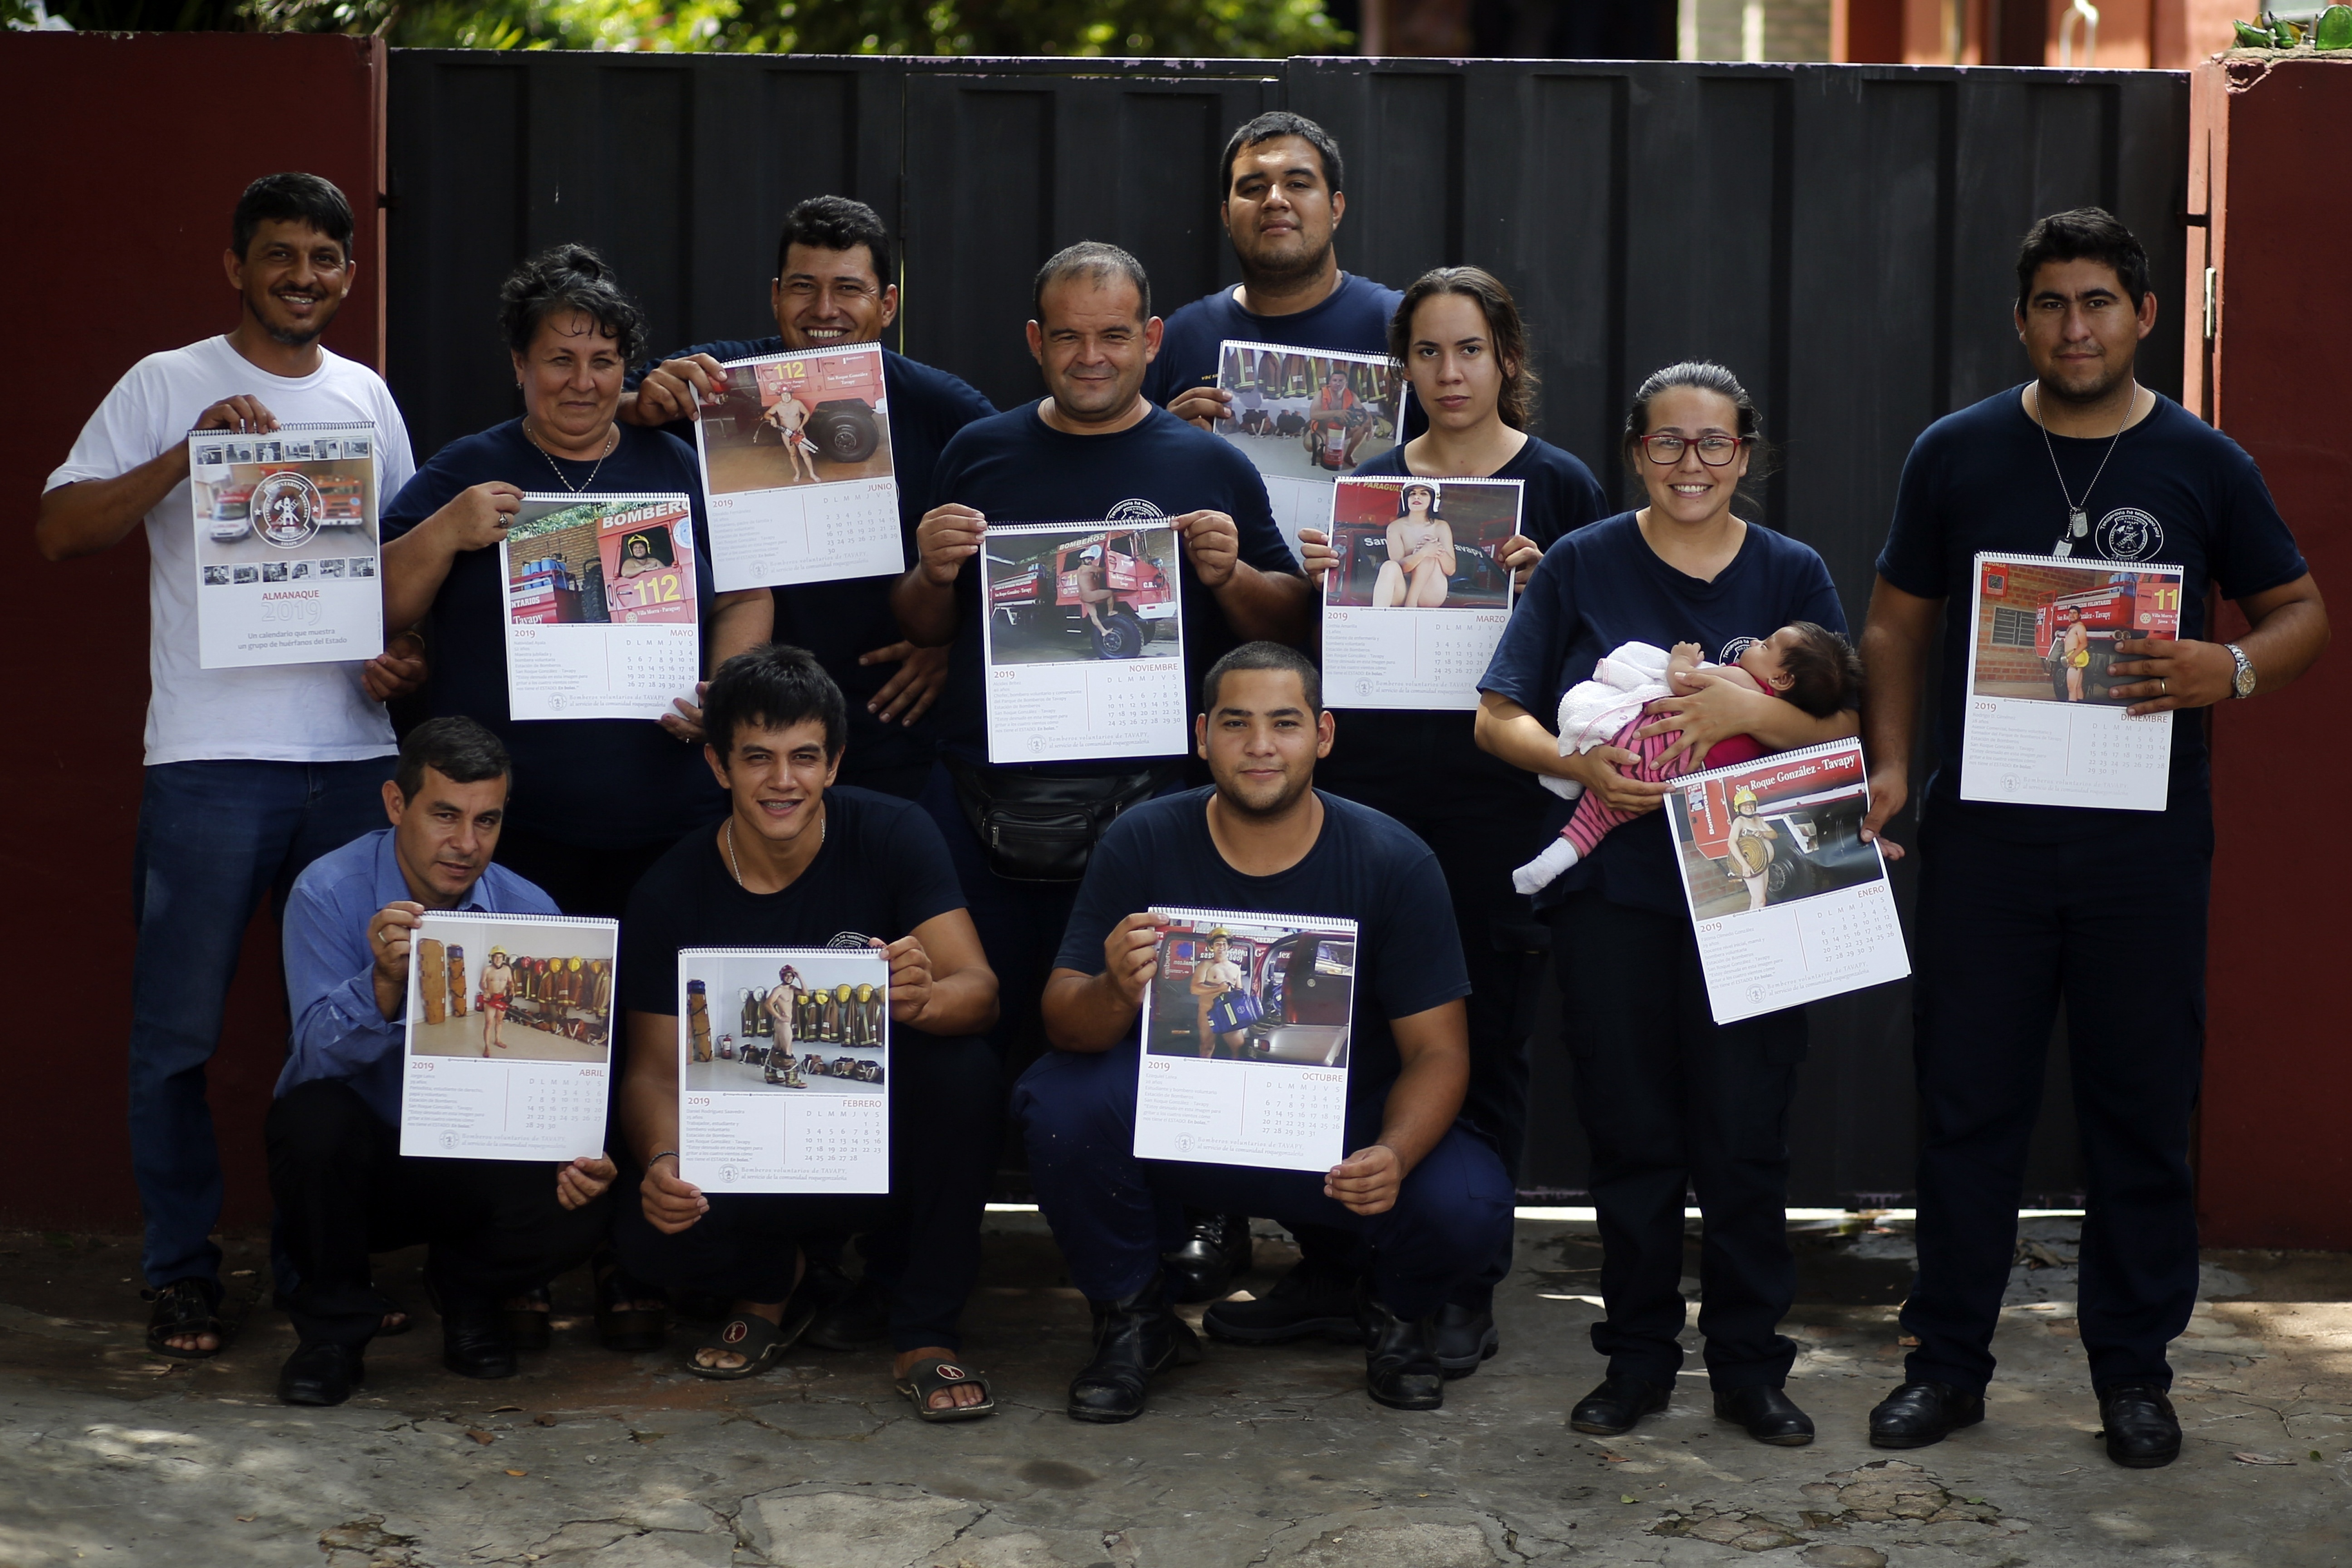 Paraguayan firefighters get naked in calendar to raise funds, protest government neglect